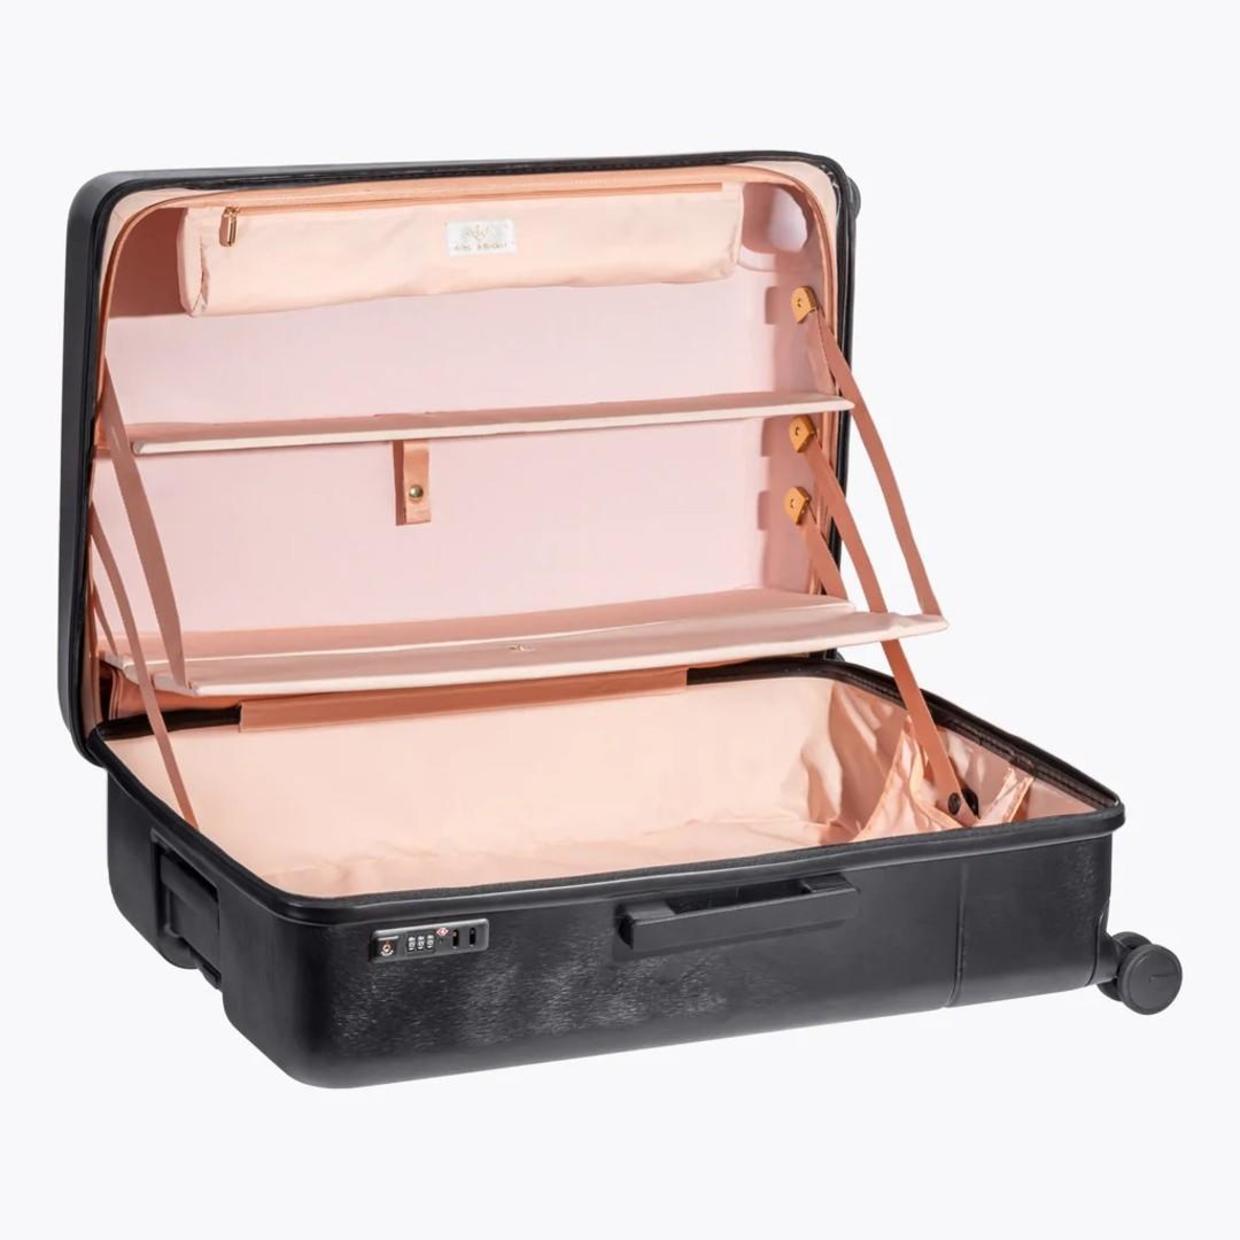 Rimowa, Paravel, Roam and more: The best luxury luggage in 2022 - CBS News